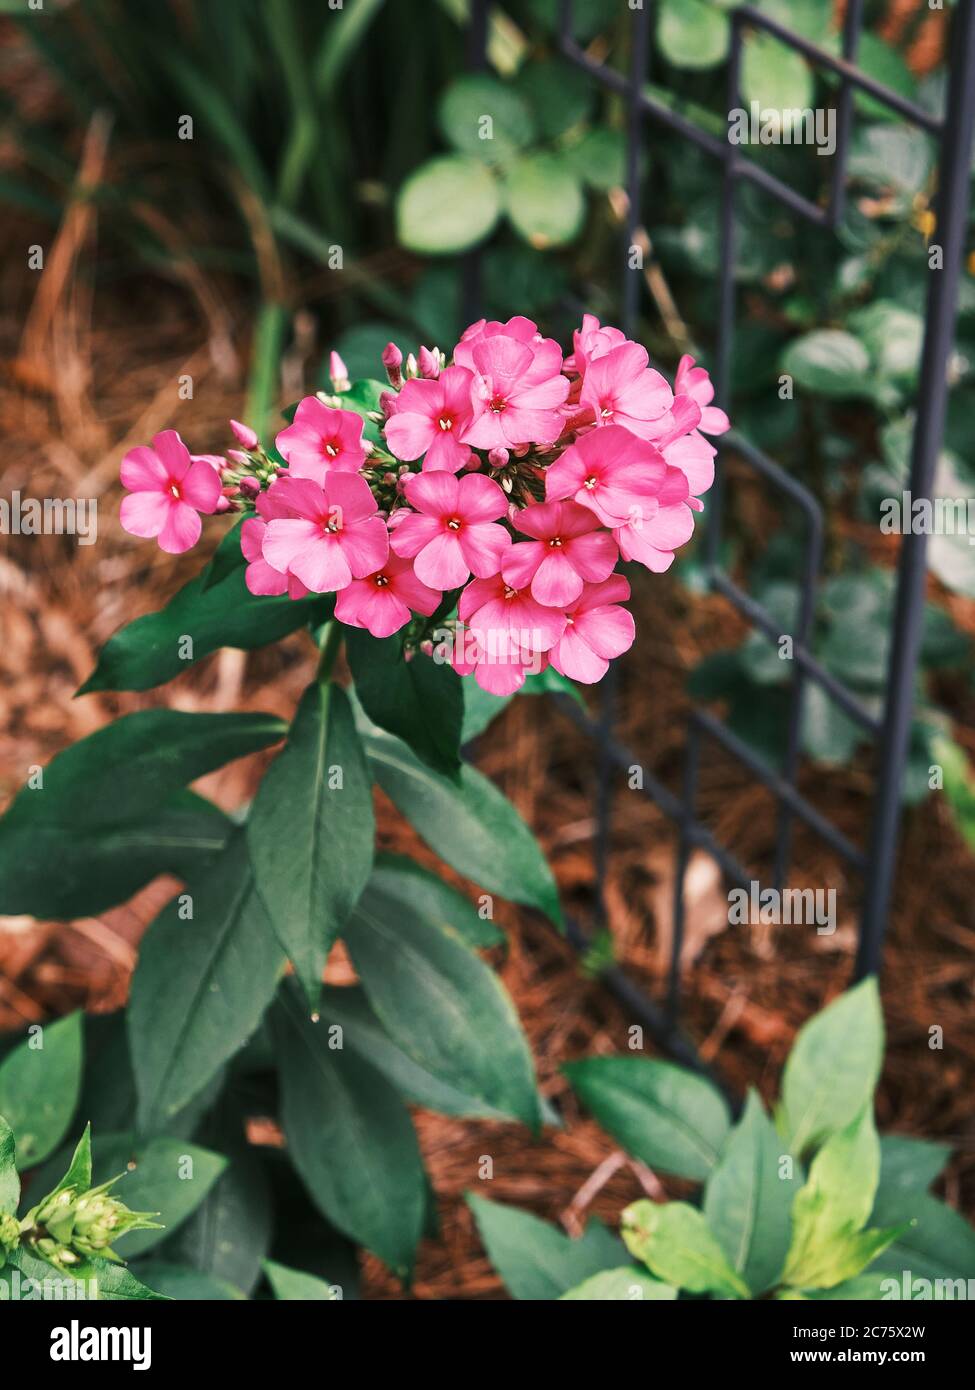 Pink or red phlox, a blooming perennial home garden plant  with showy bright color flowers. Stock Photo